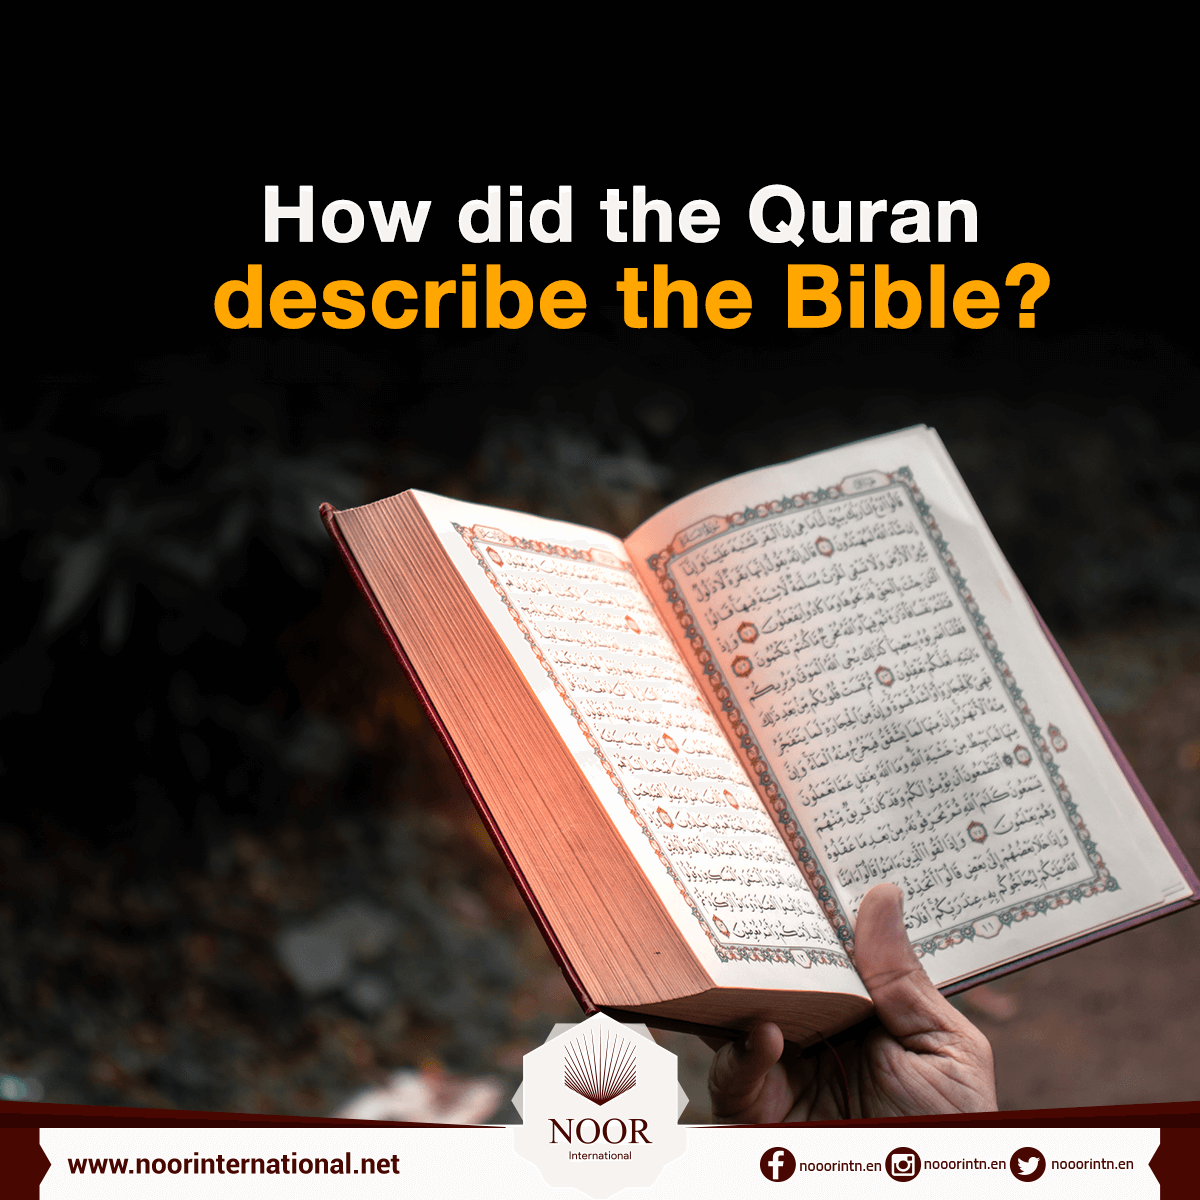 How did the Quran describe the Bible?